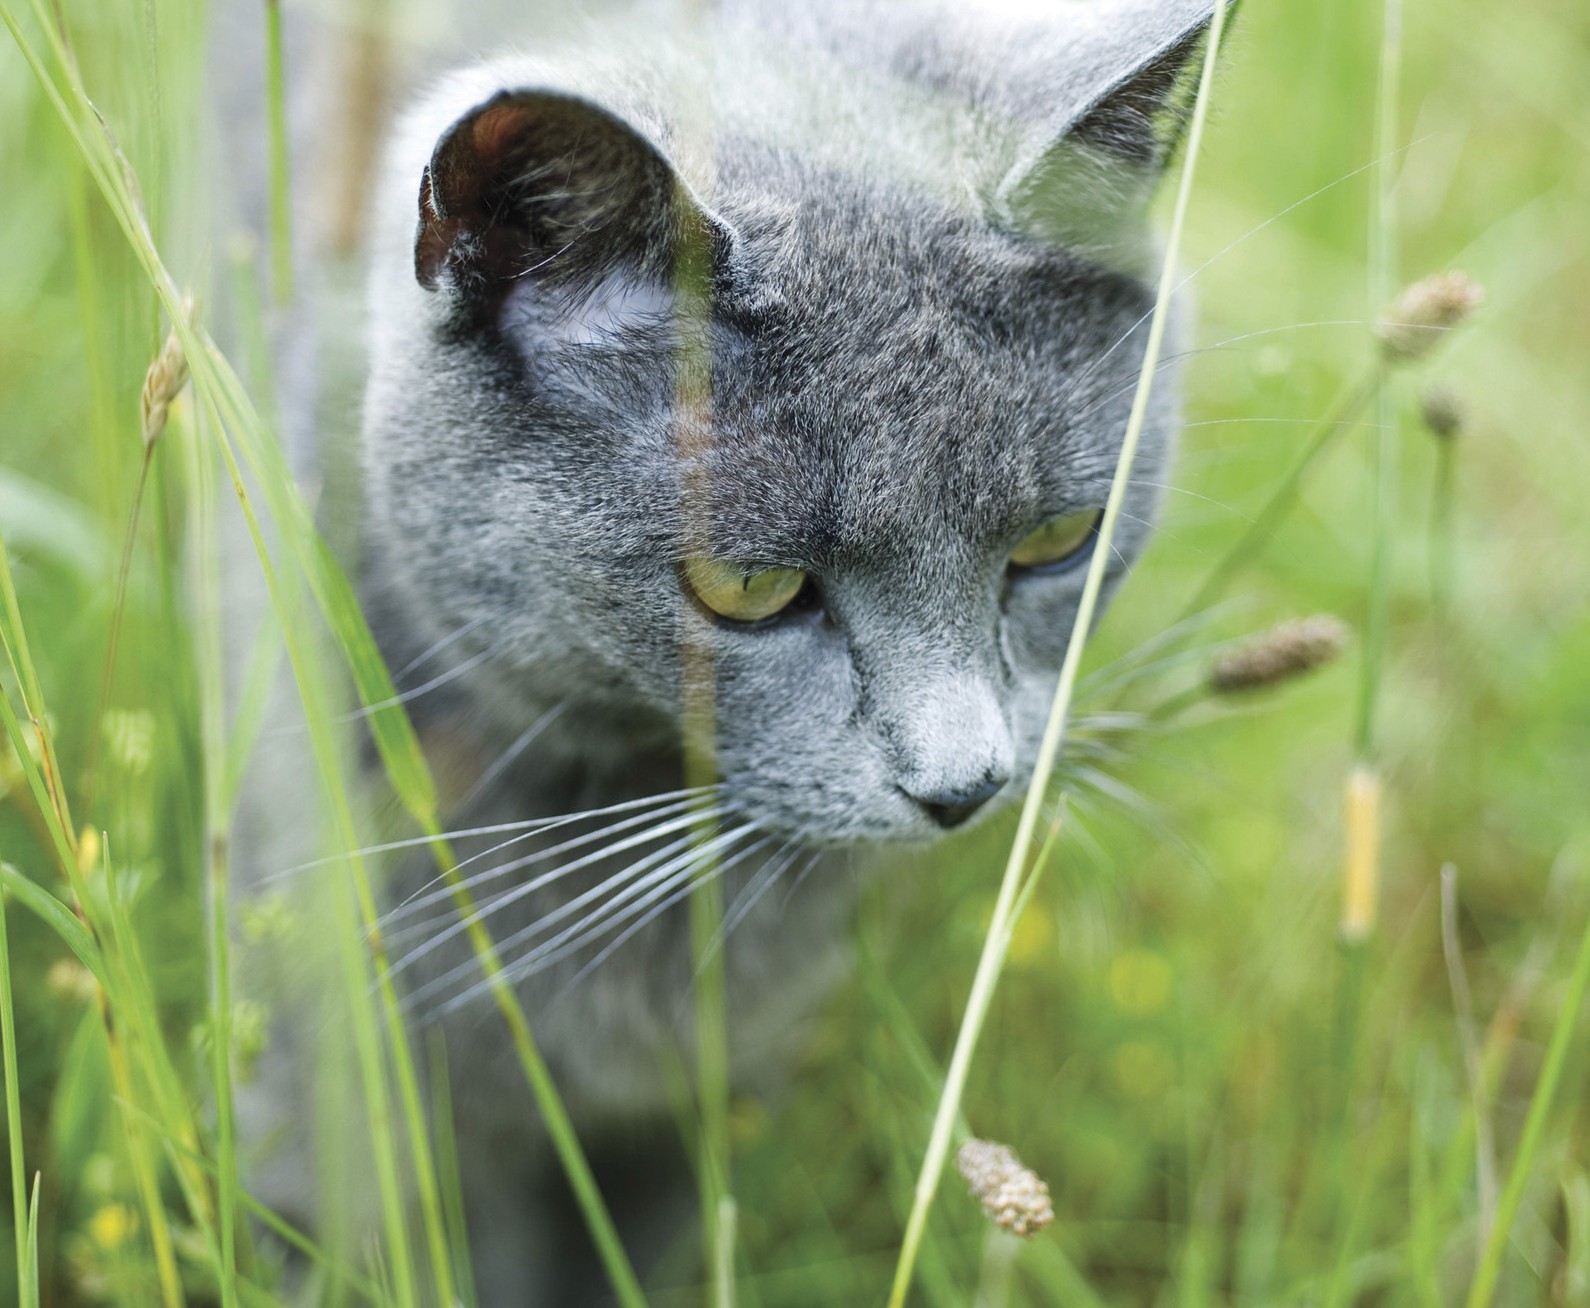 It's healthy to hunt: How to handle your cat's natural instinct ...